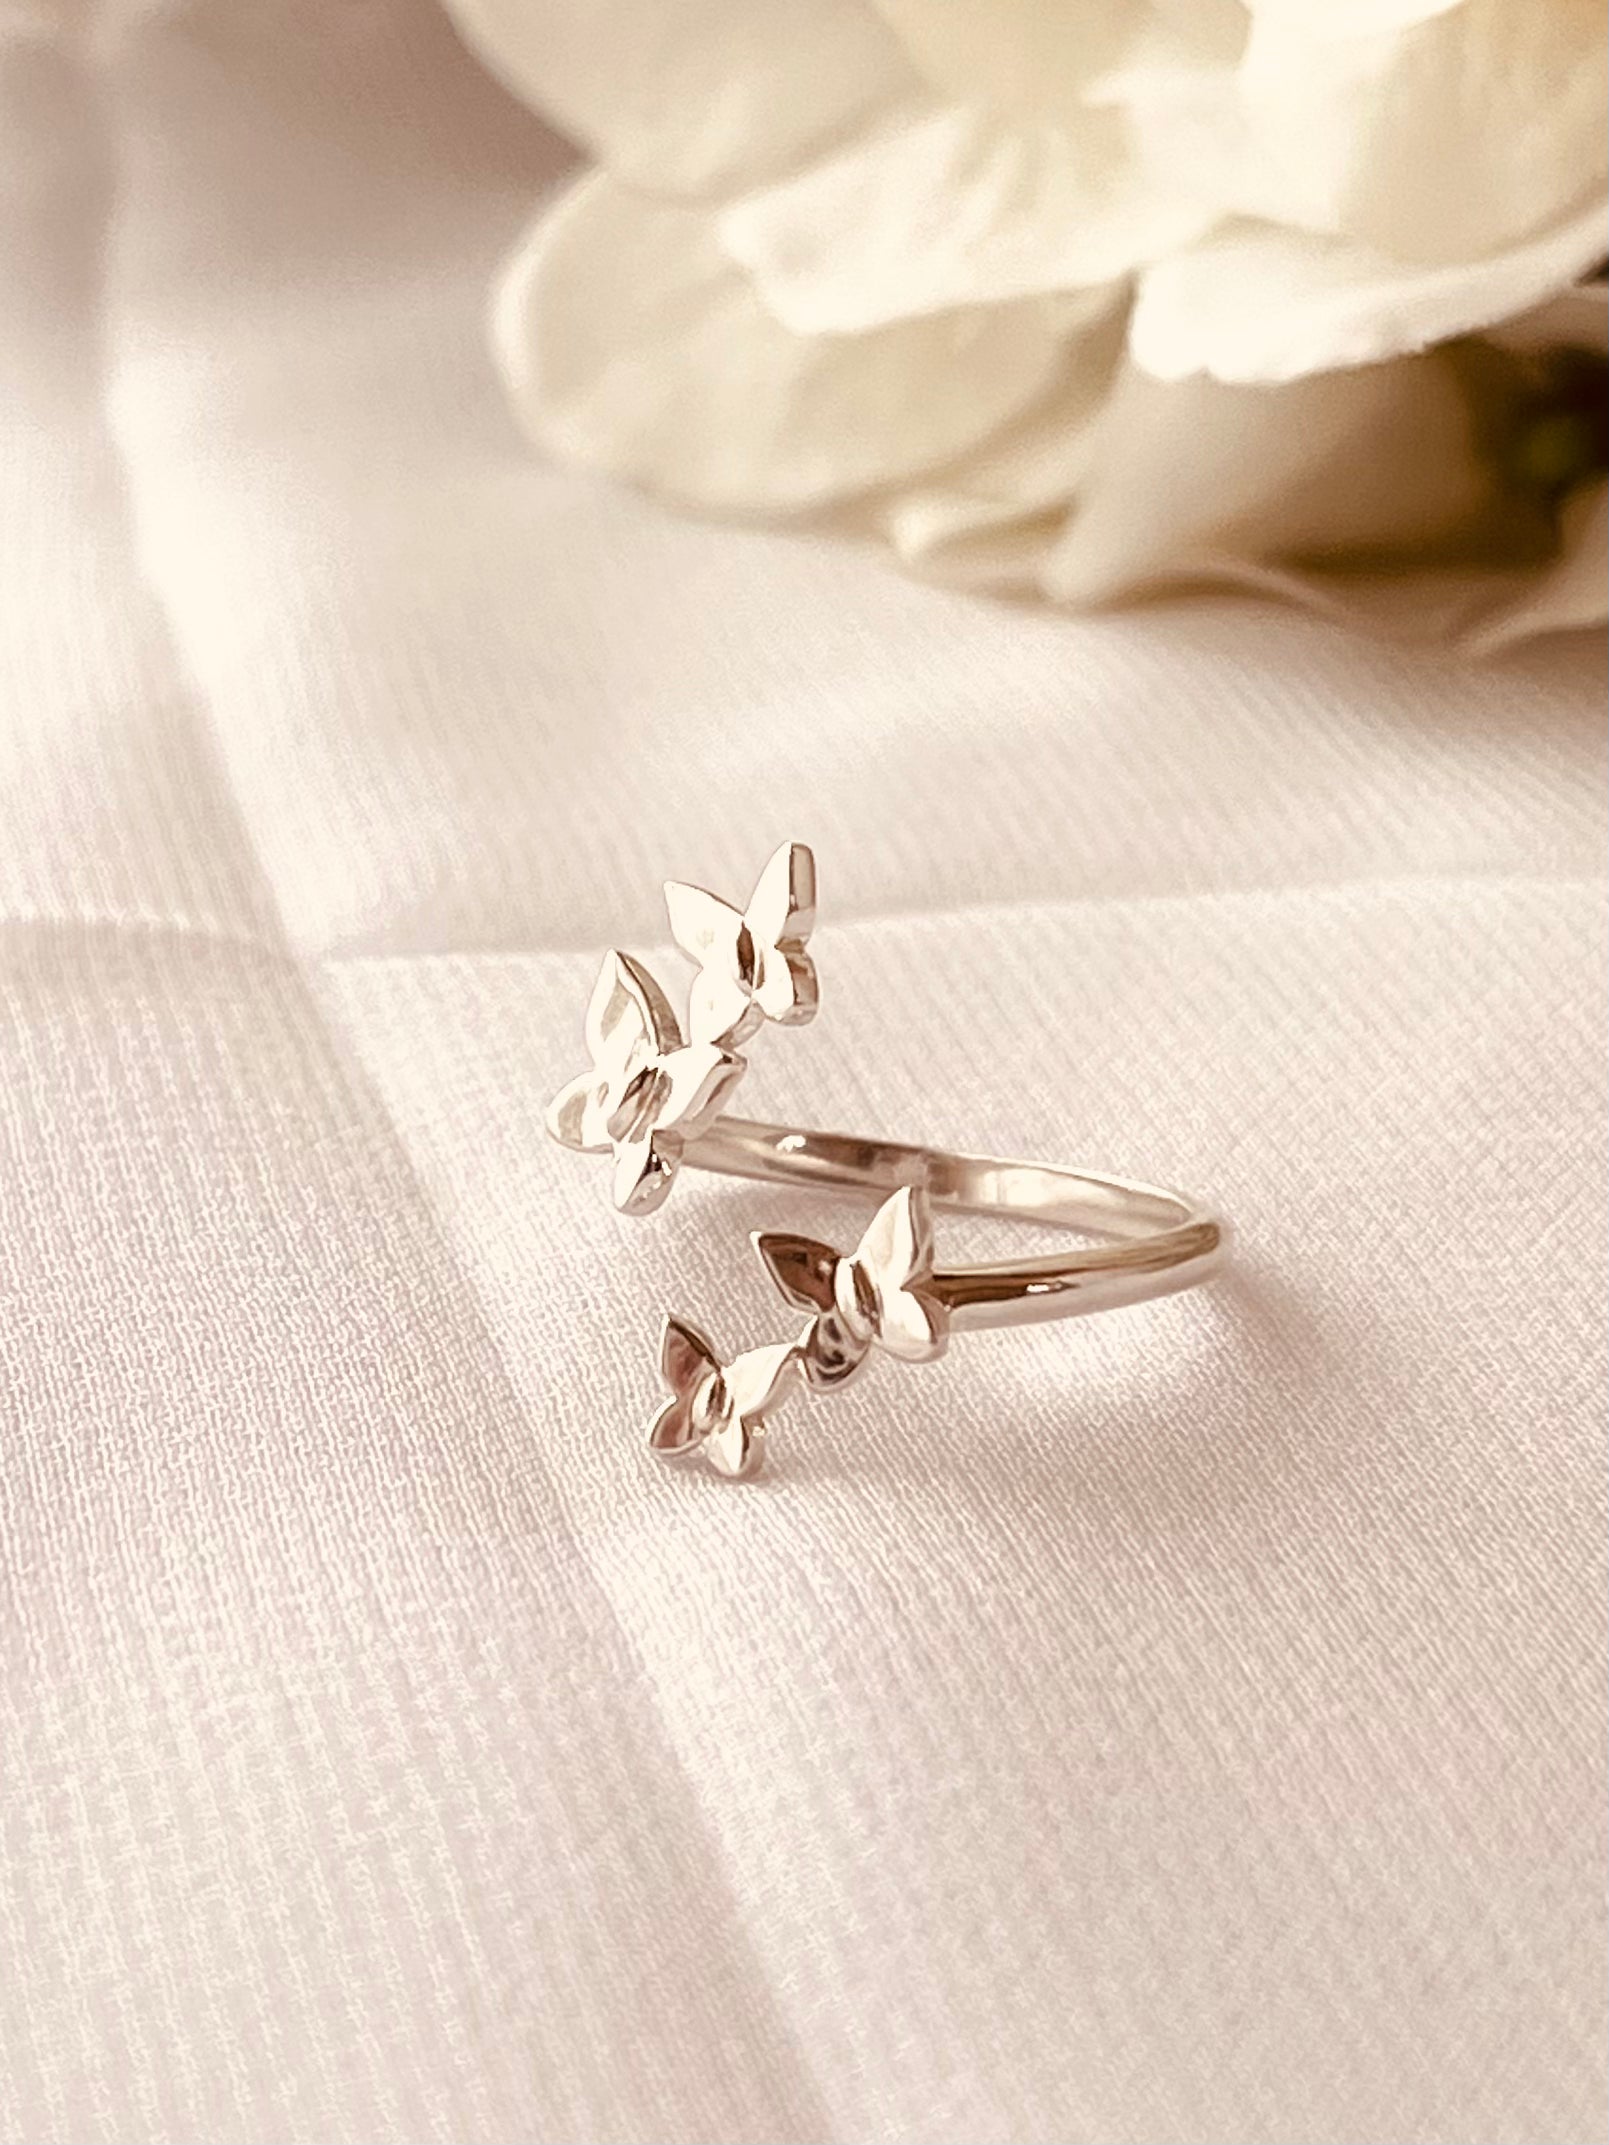 Butterfly Ring, Sterling Silver Adjustable Butterfly Ring, Statement Ring, Butterfly Jewelry, Stacking Ring, Christmas Gifts For Her